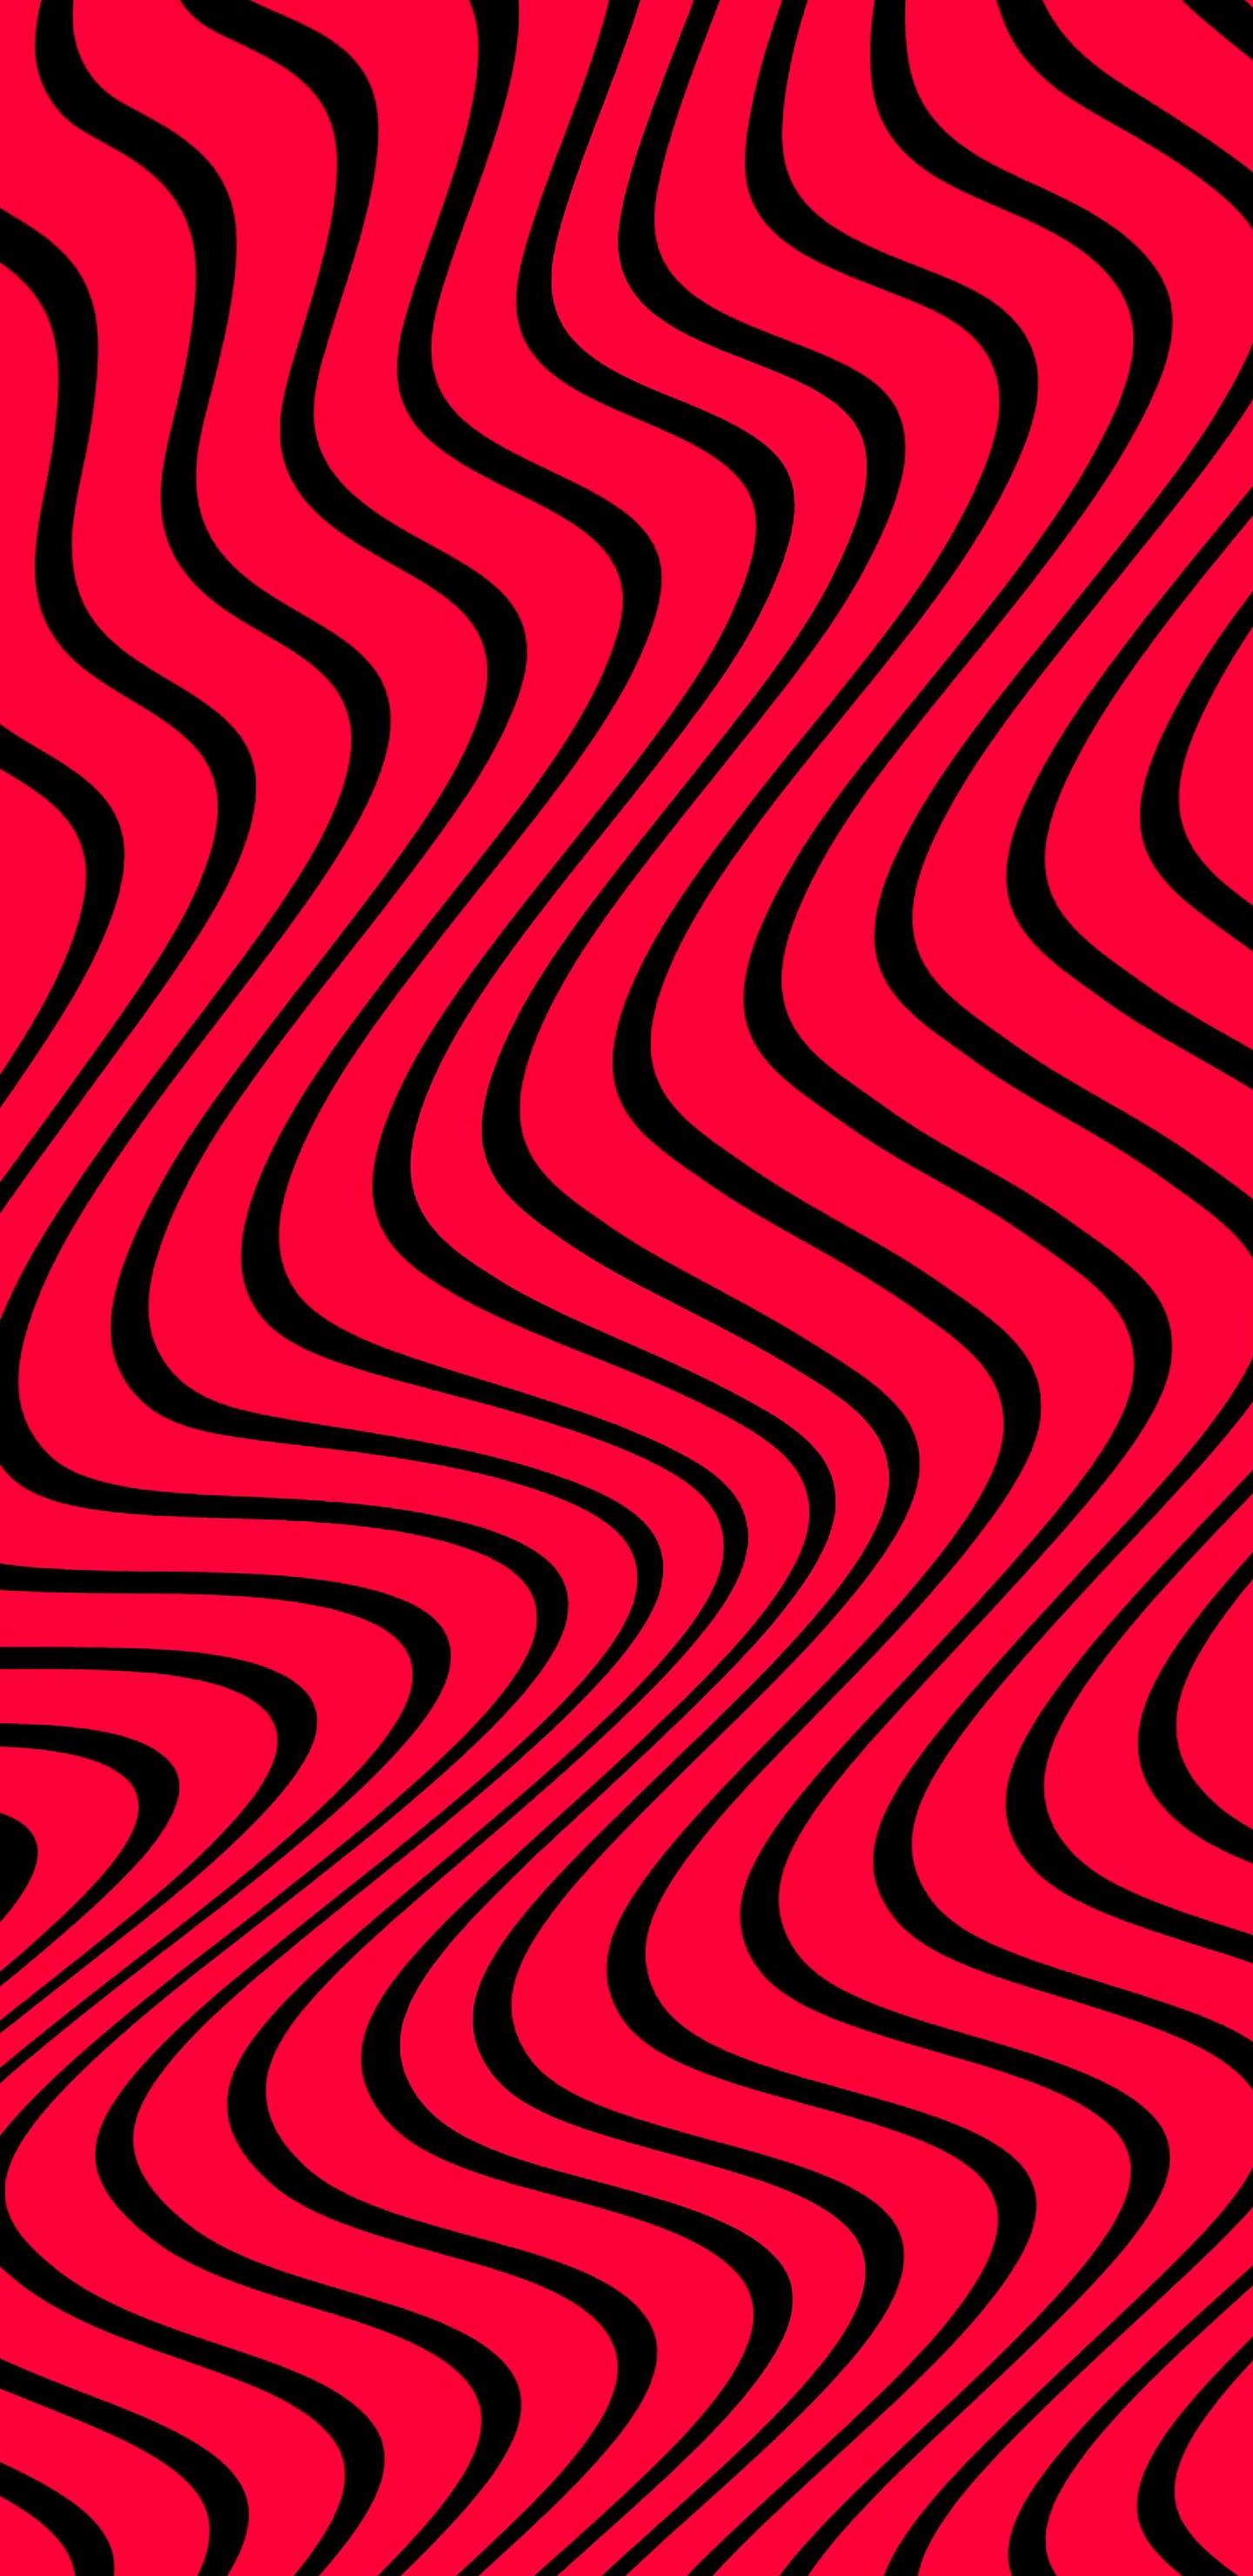 I formatted the pewdiepie design to fit as a